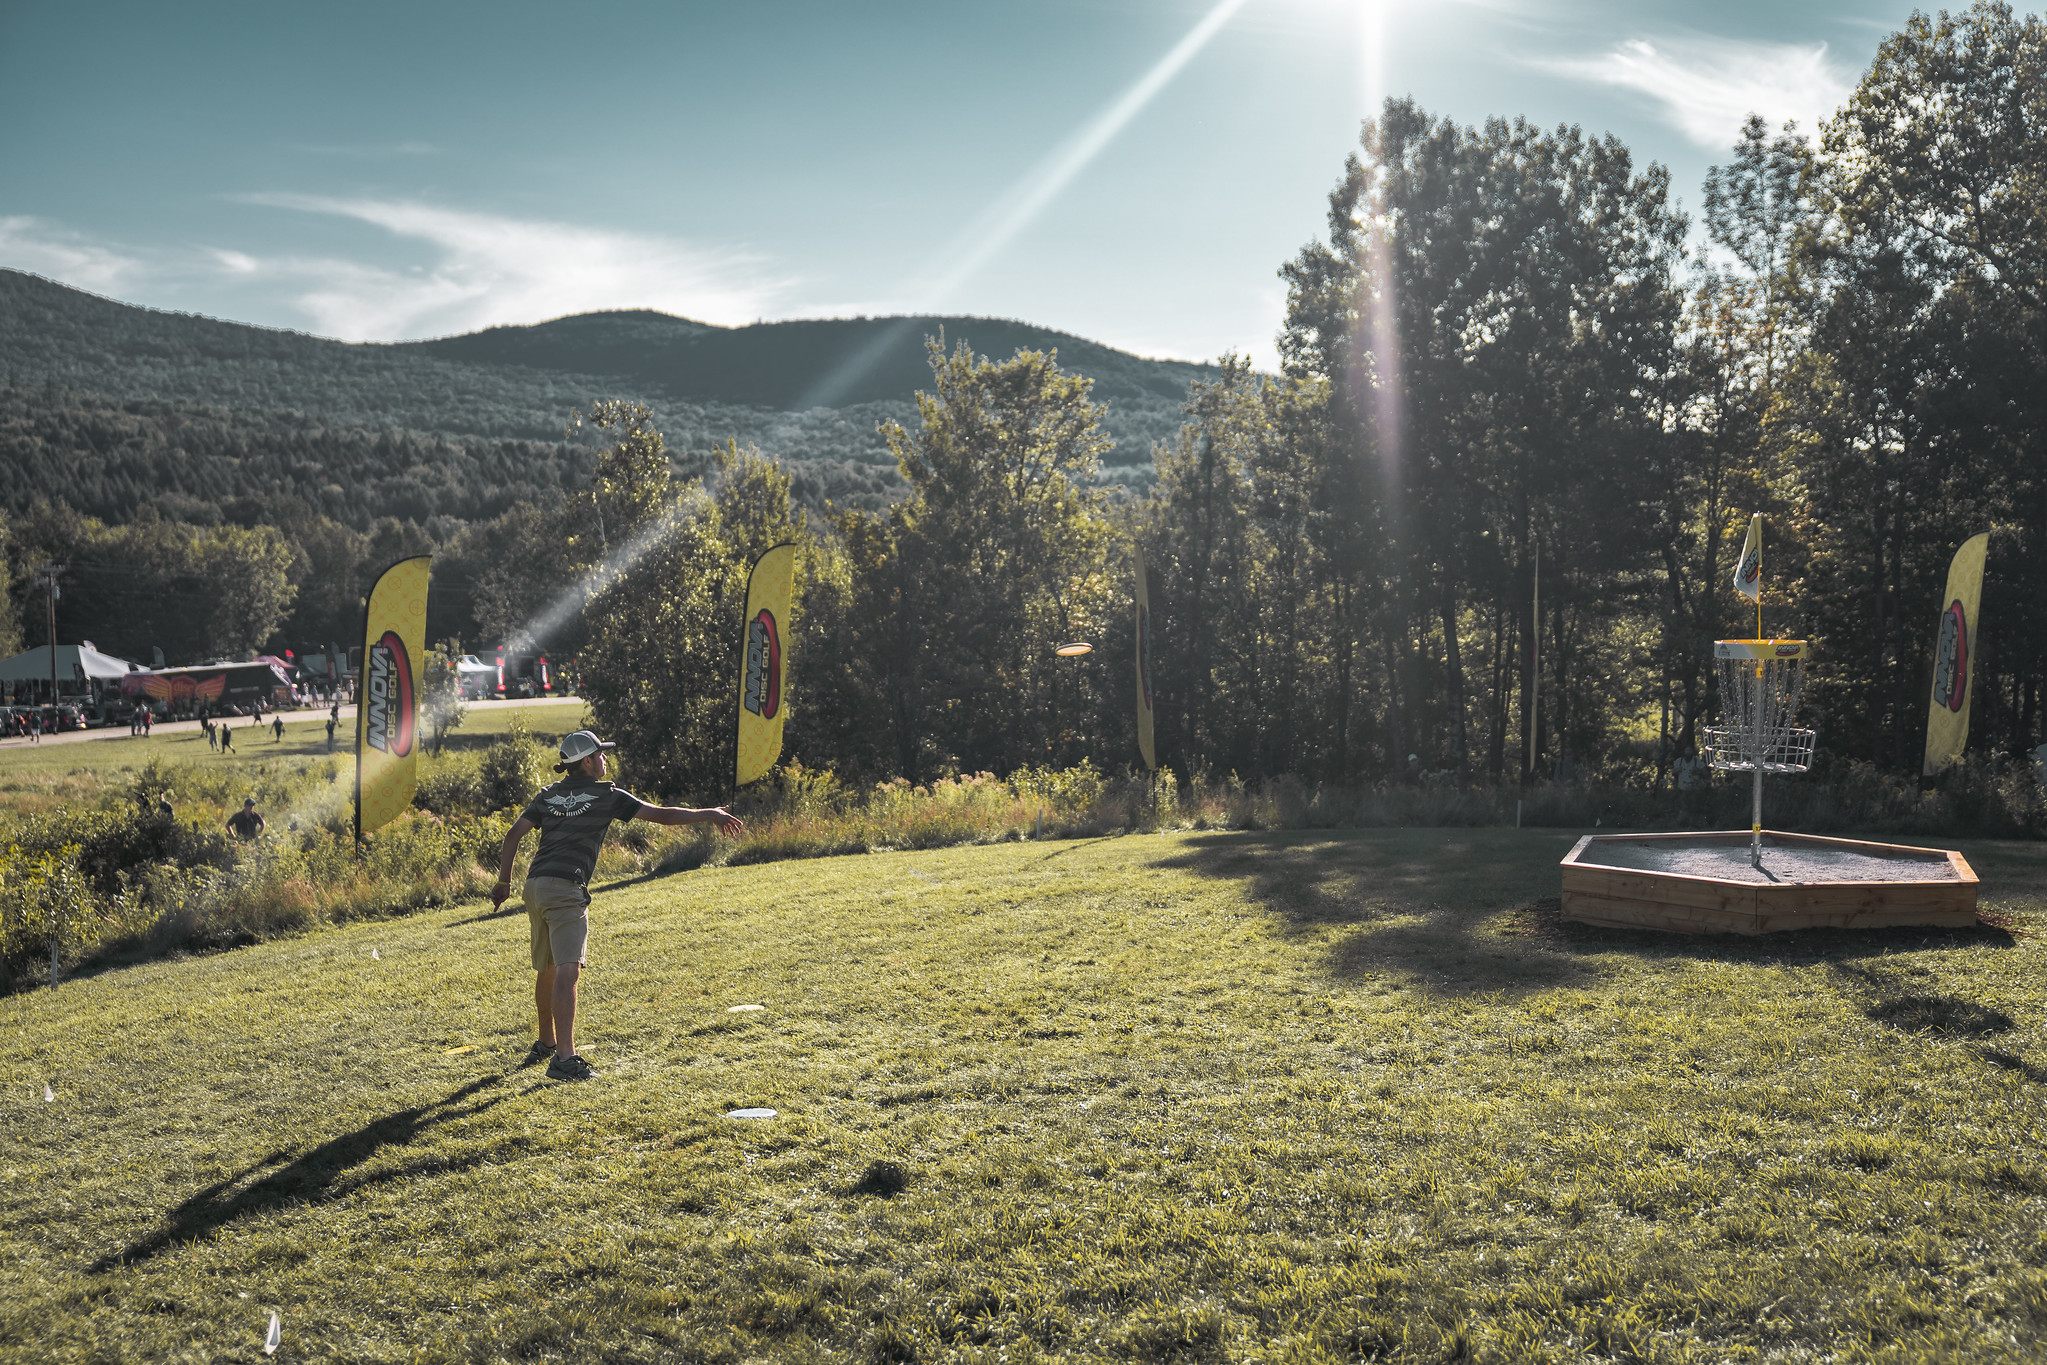 2023 Disc Golf World Championship Return to Smugglers’ Vermont Notch